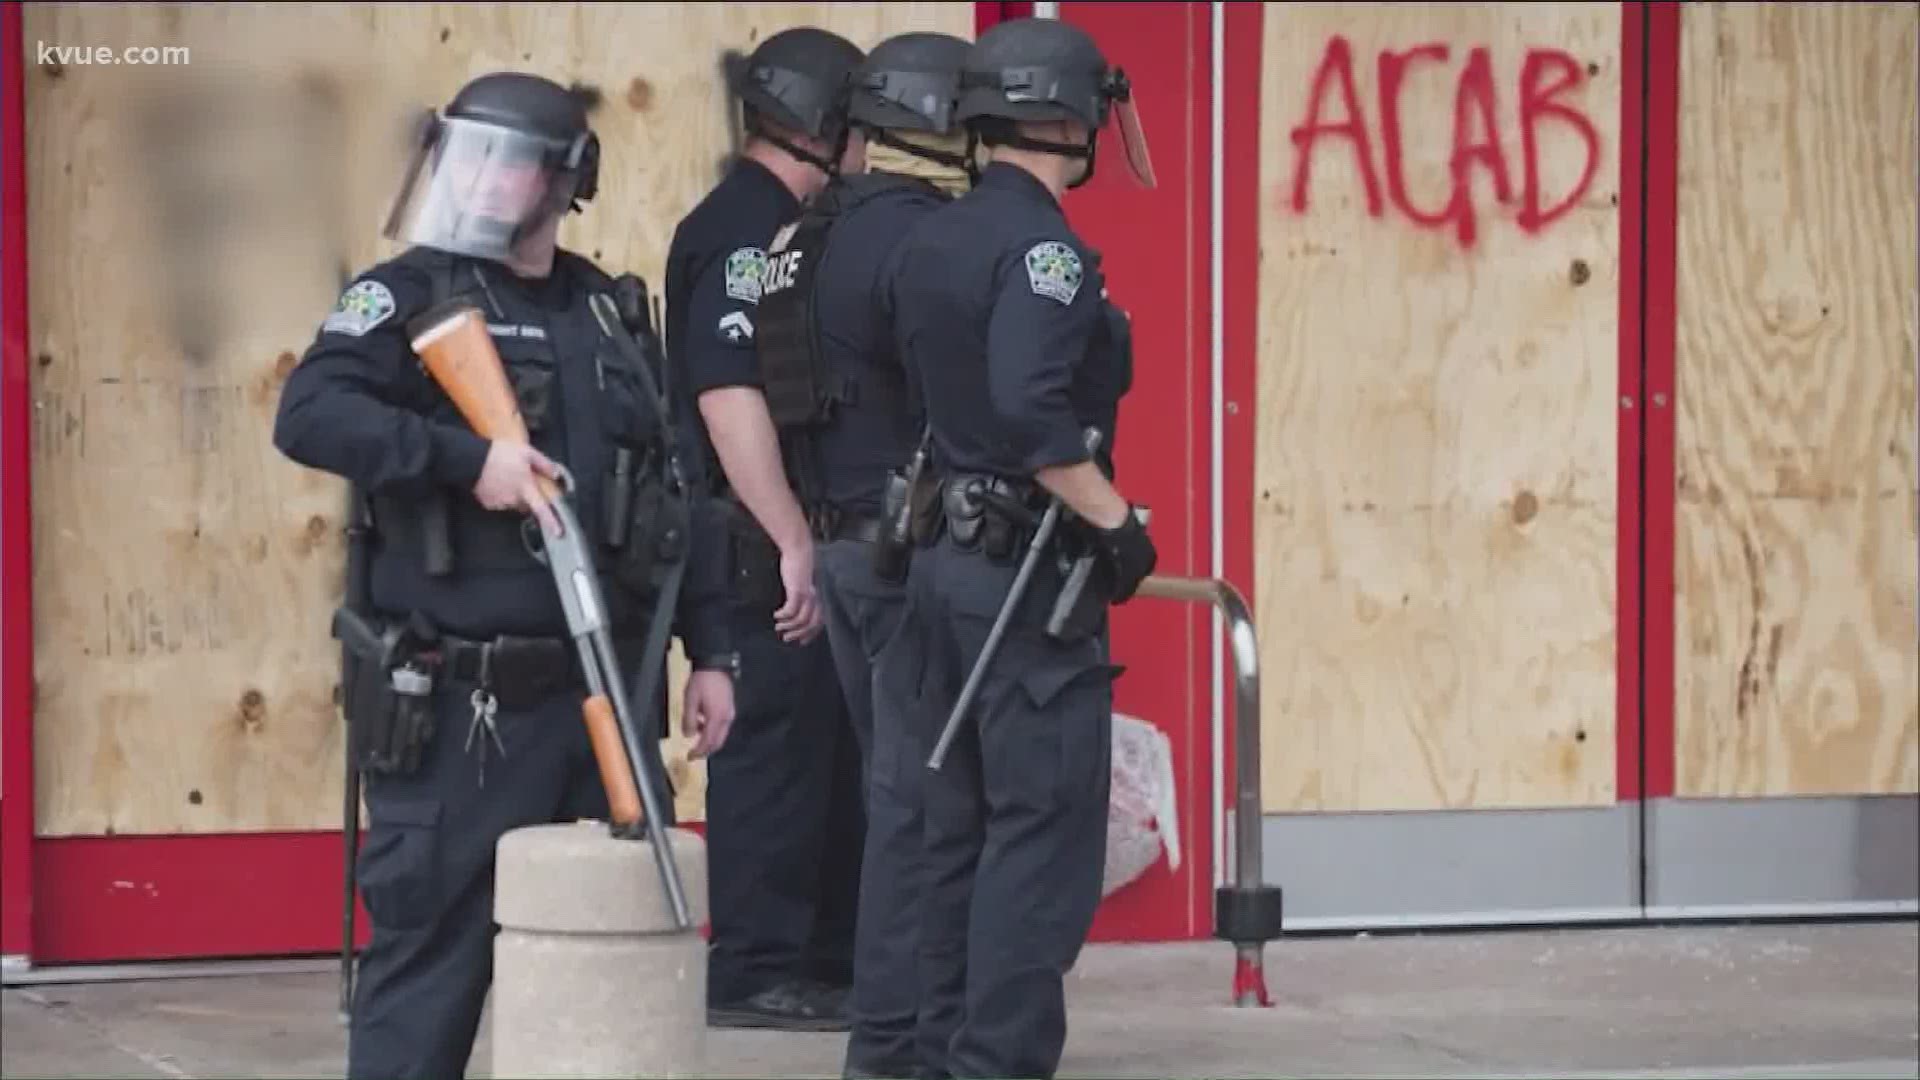 It wasn't protesters who were behind the looting at an Austin Target on Sunday night. The Texas Department of Public Safety said Antifa initiated the violence.